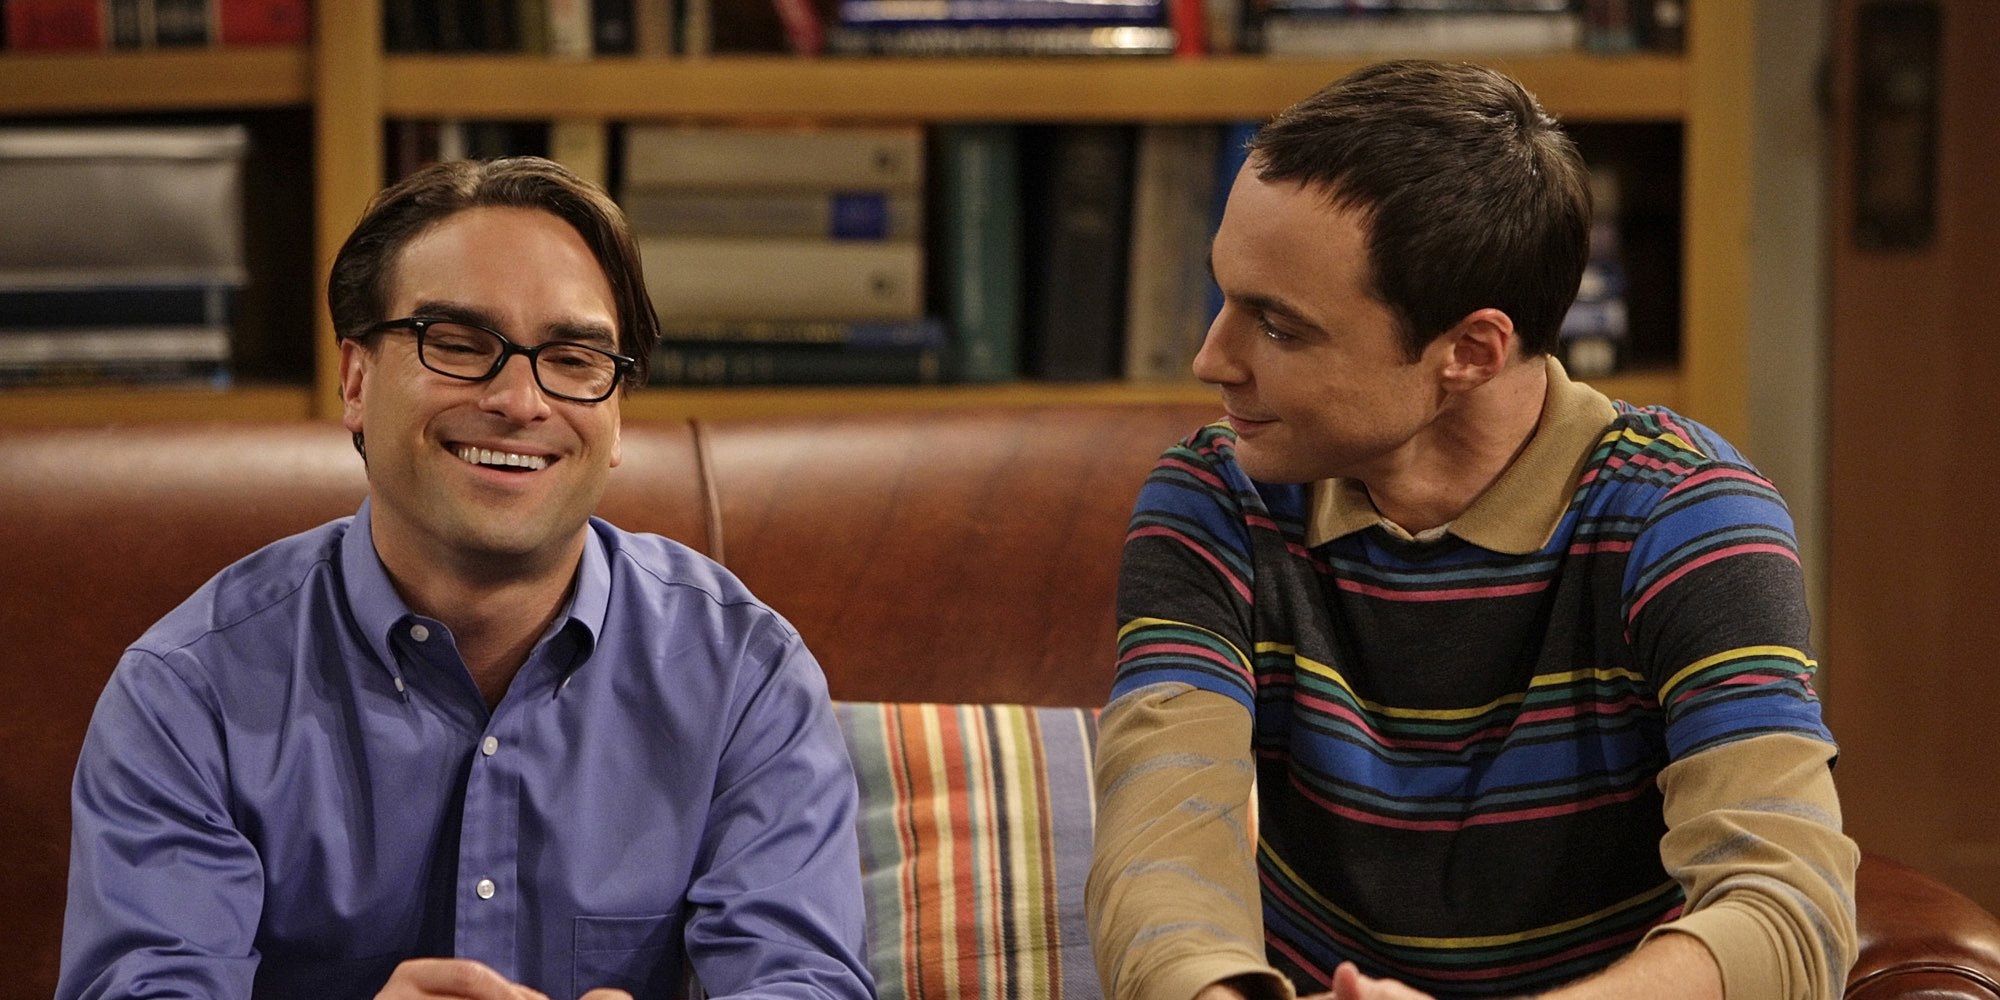 Big Bang Theory: 10 Times Sheldon Was The Smartest Character In The Series